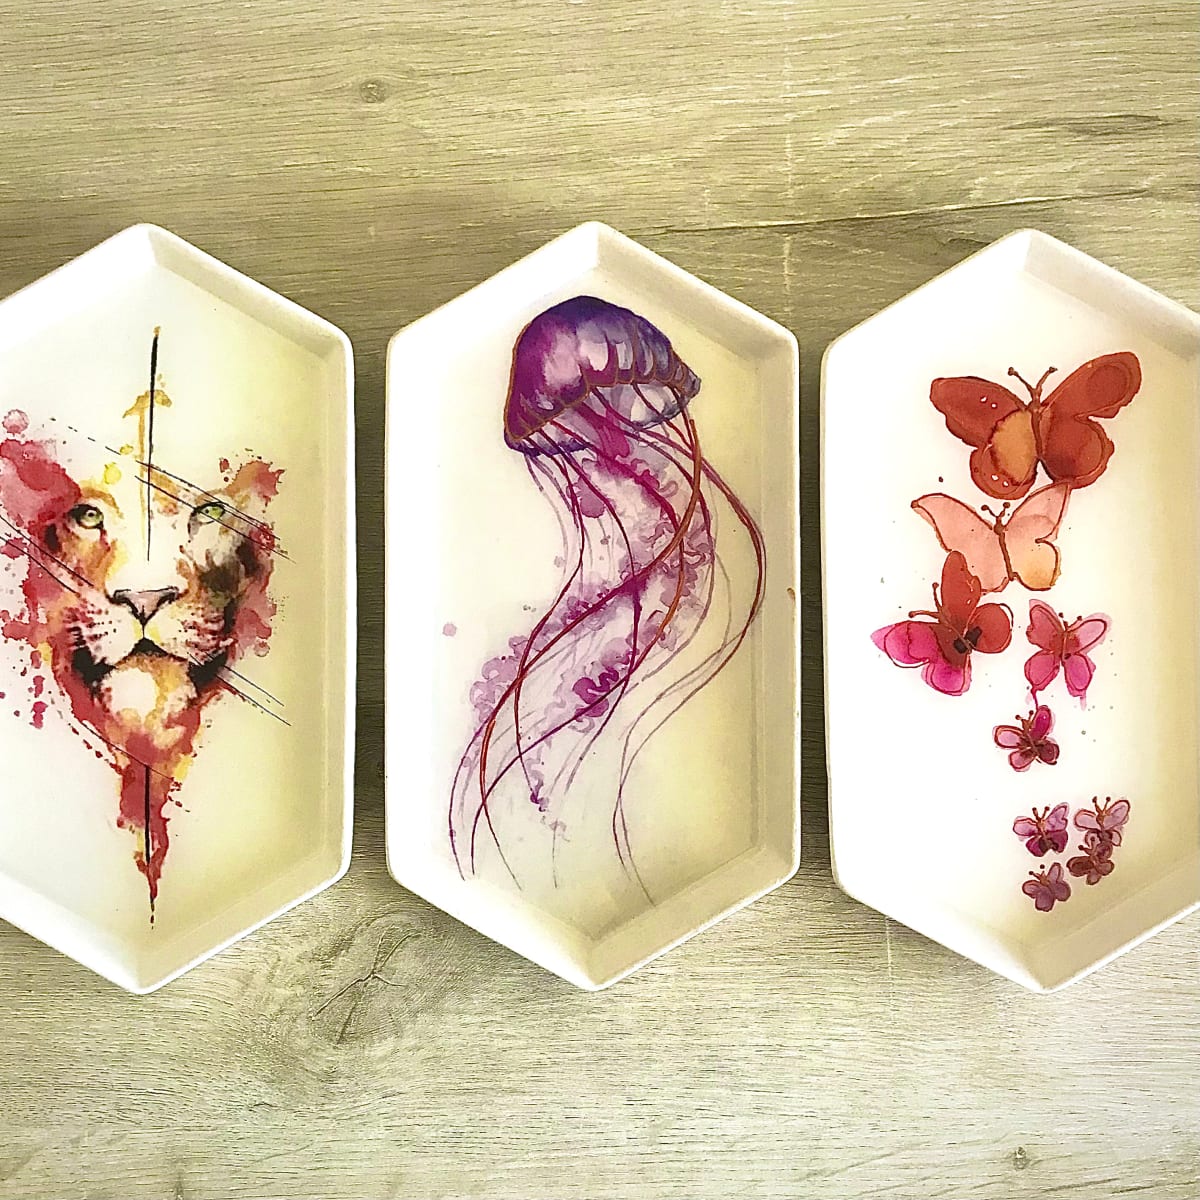 Ceramic Resin Tray by Colorvine by Kelsey  Image: *lion sold
*jelly sold